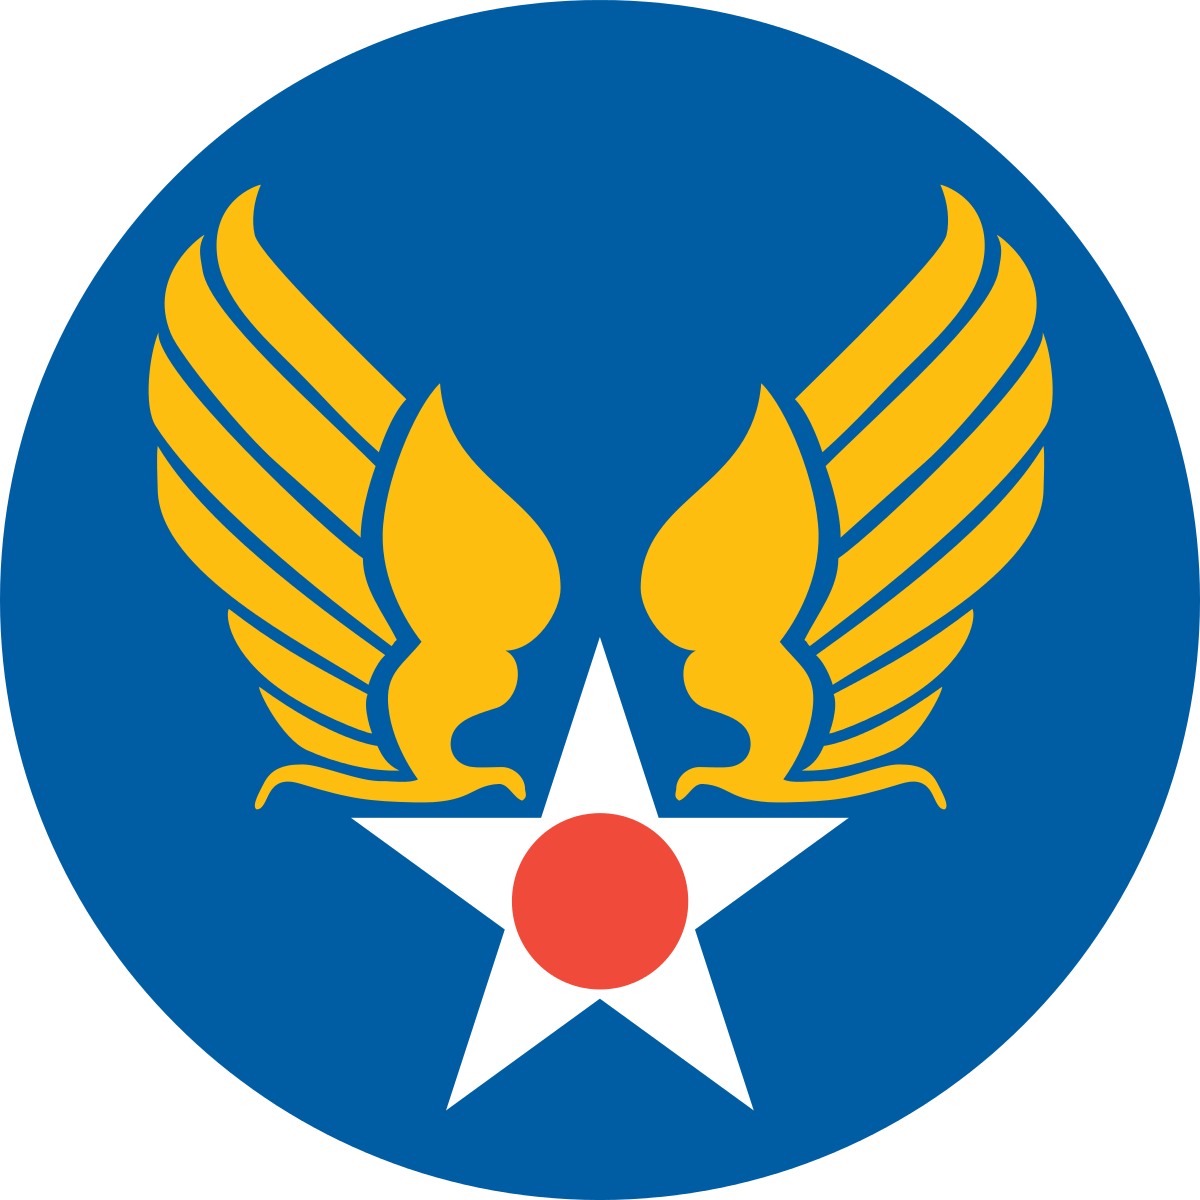 WW2 Aircraft Logo - United States Army Air Forces